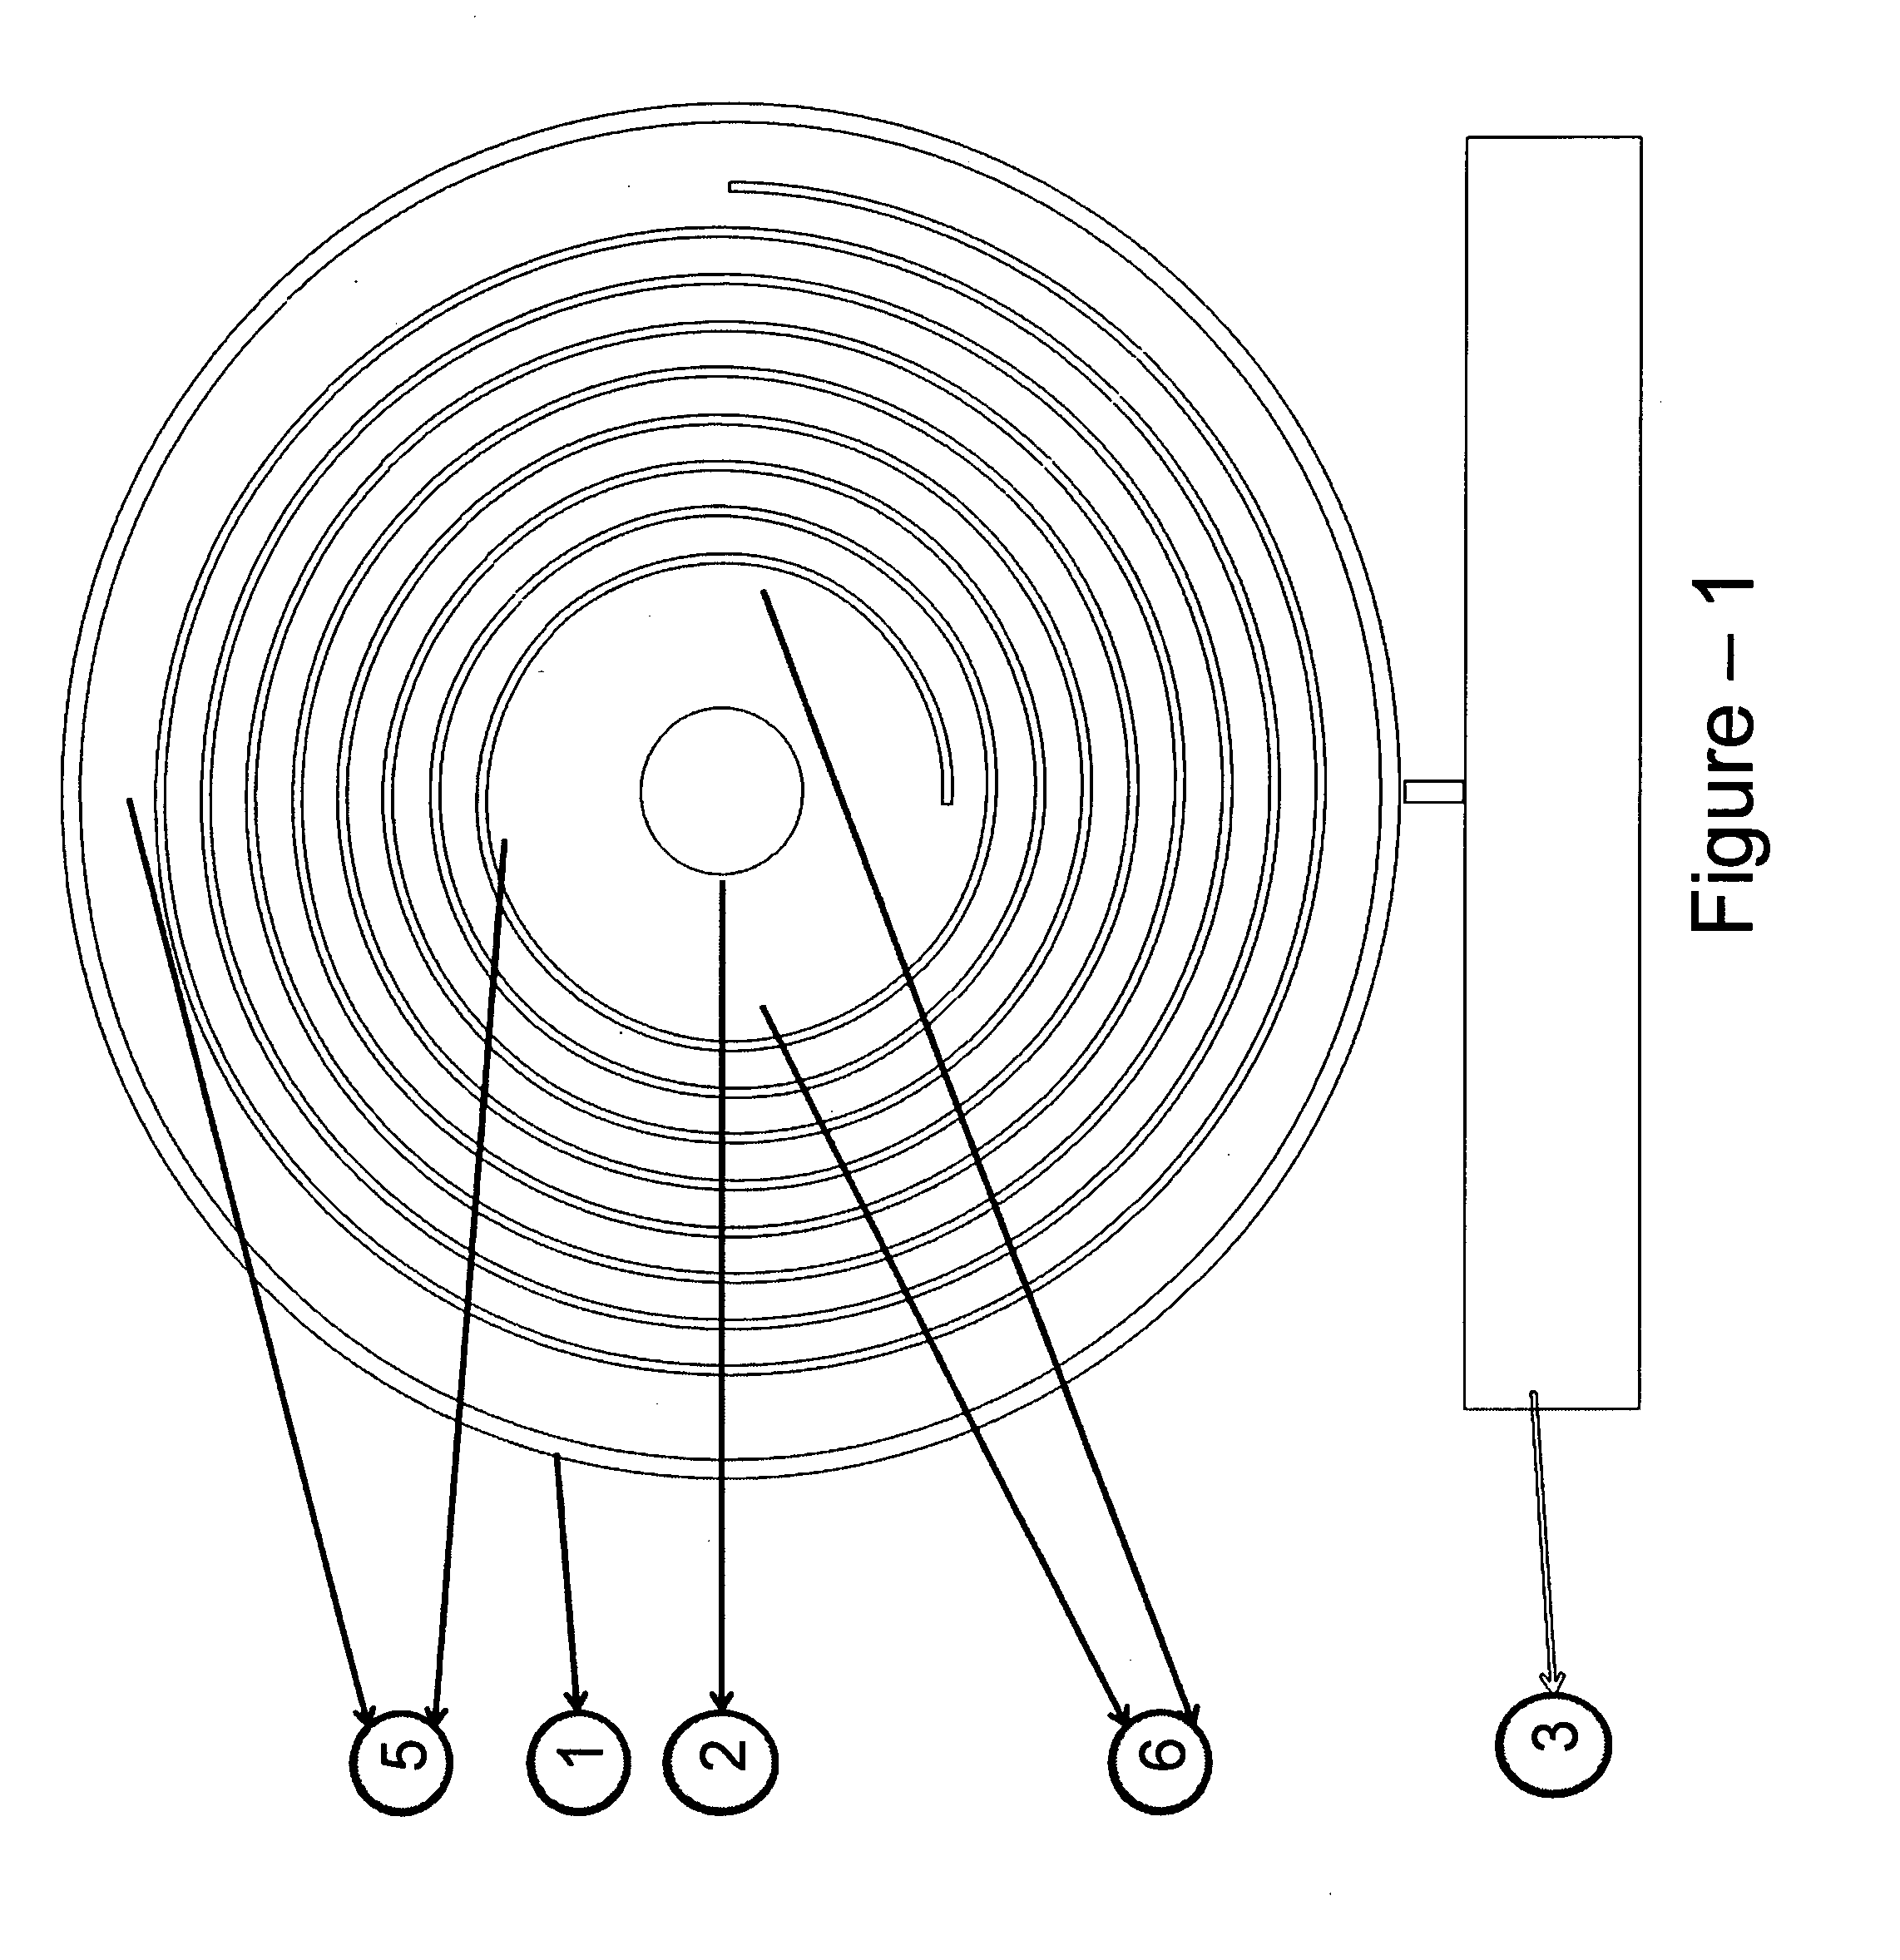 Dielectrophoretic Cell Chromatography Device with Spiral Microfluidic Channels and Concentric Electrodes, Fabricated with MEMS Technology